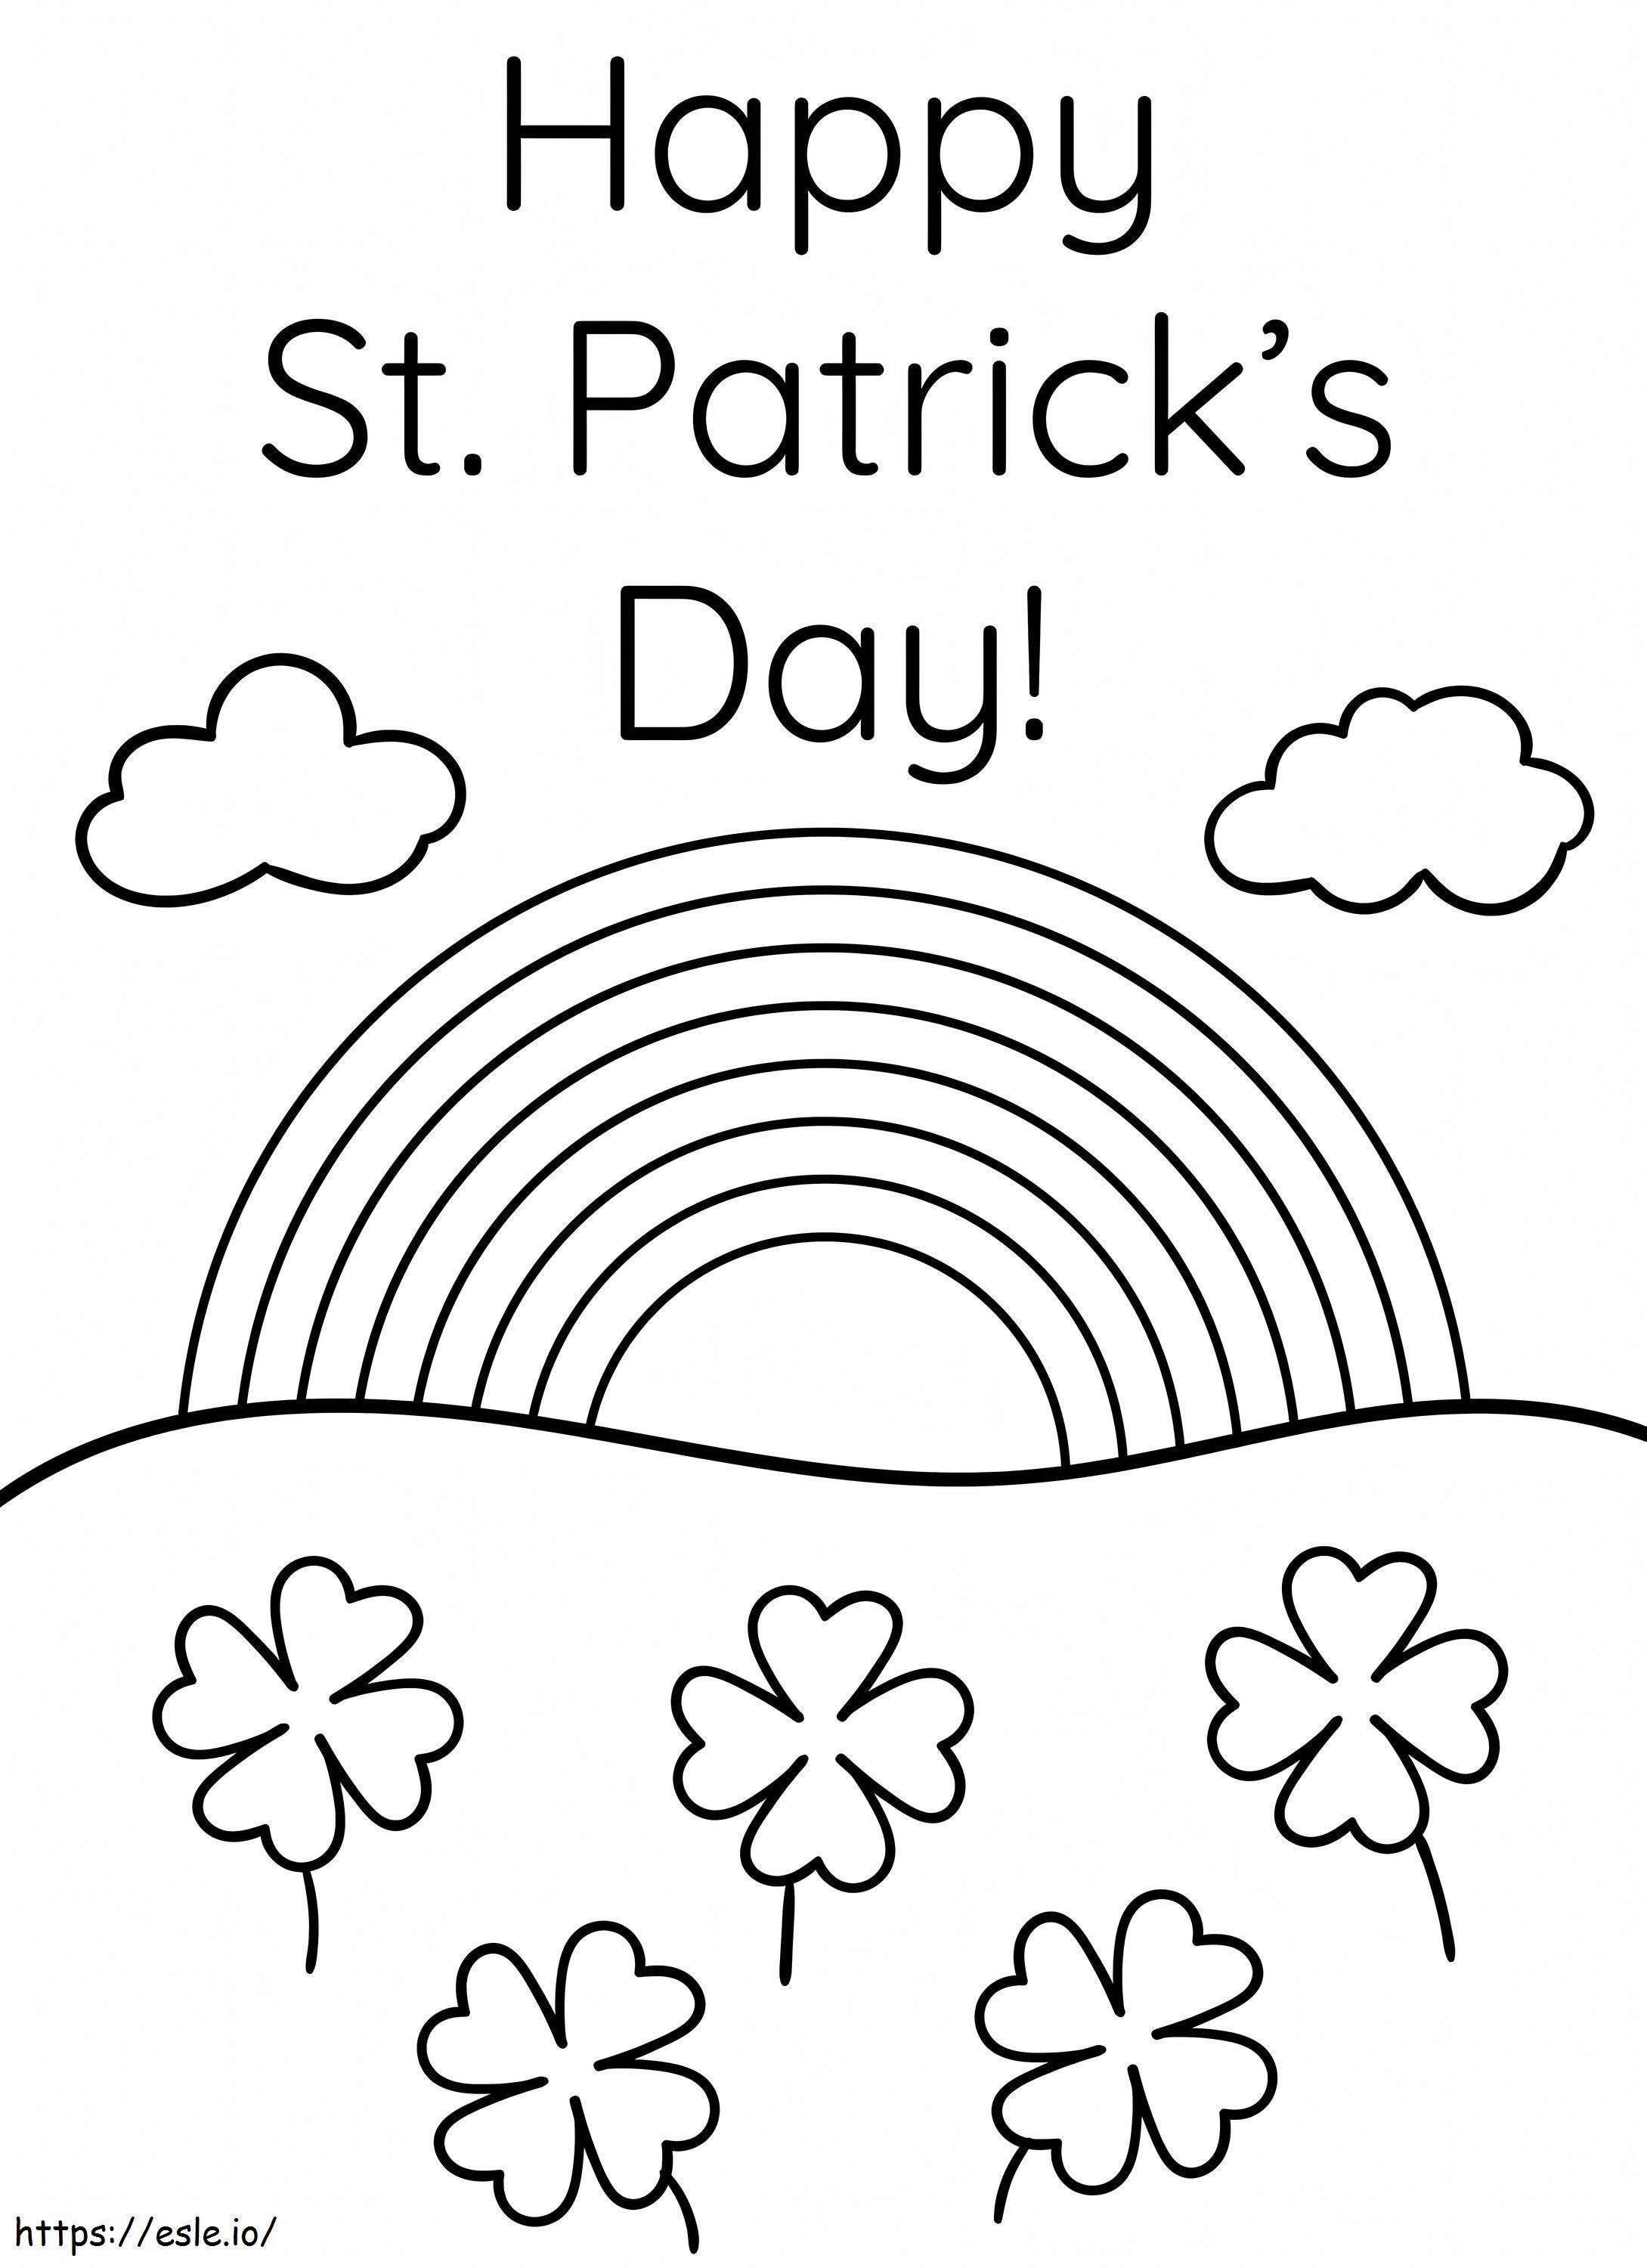 Free Happy St. Patricks Day coloring page